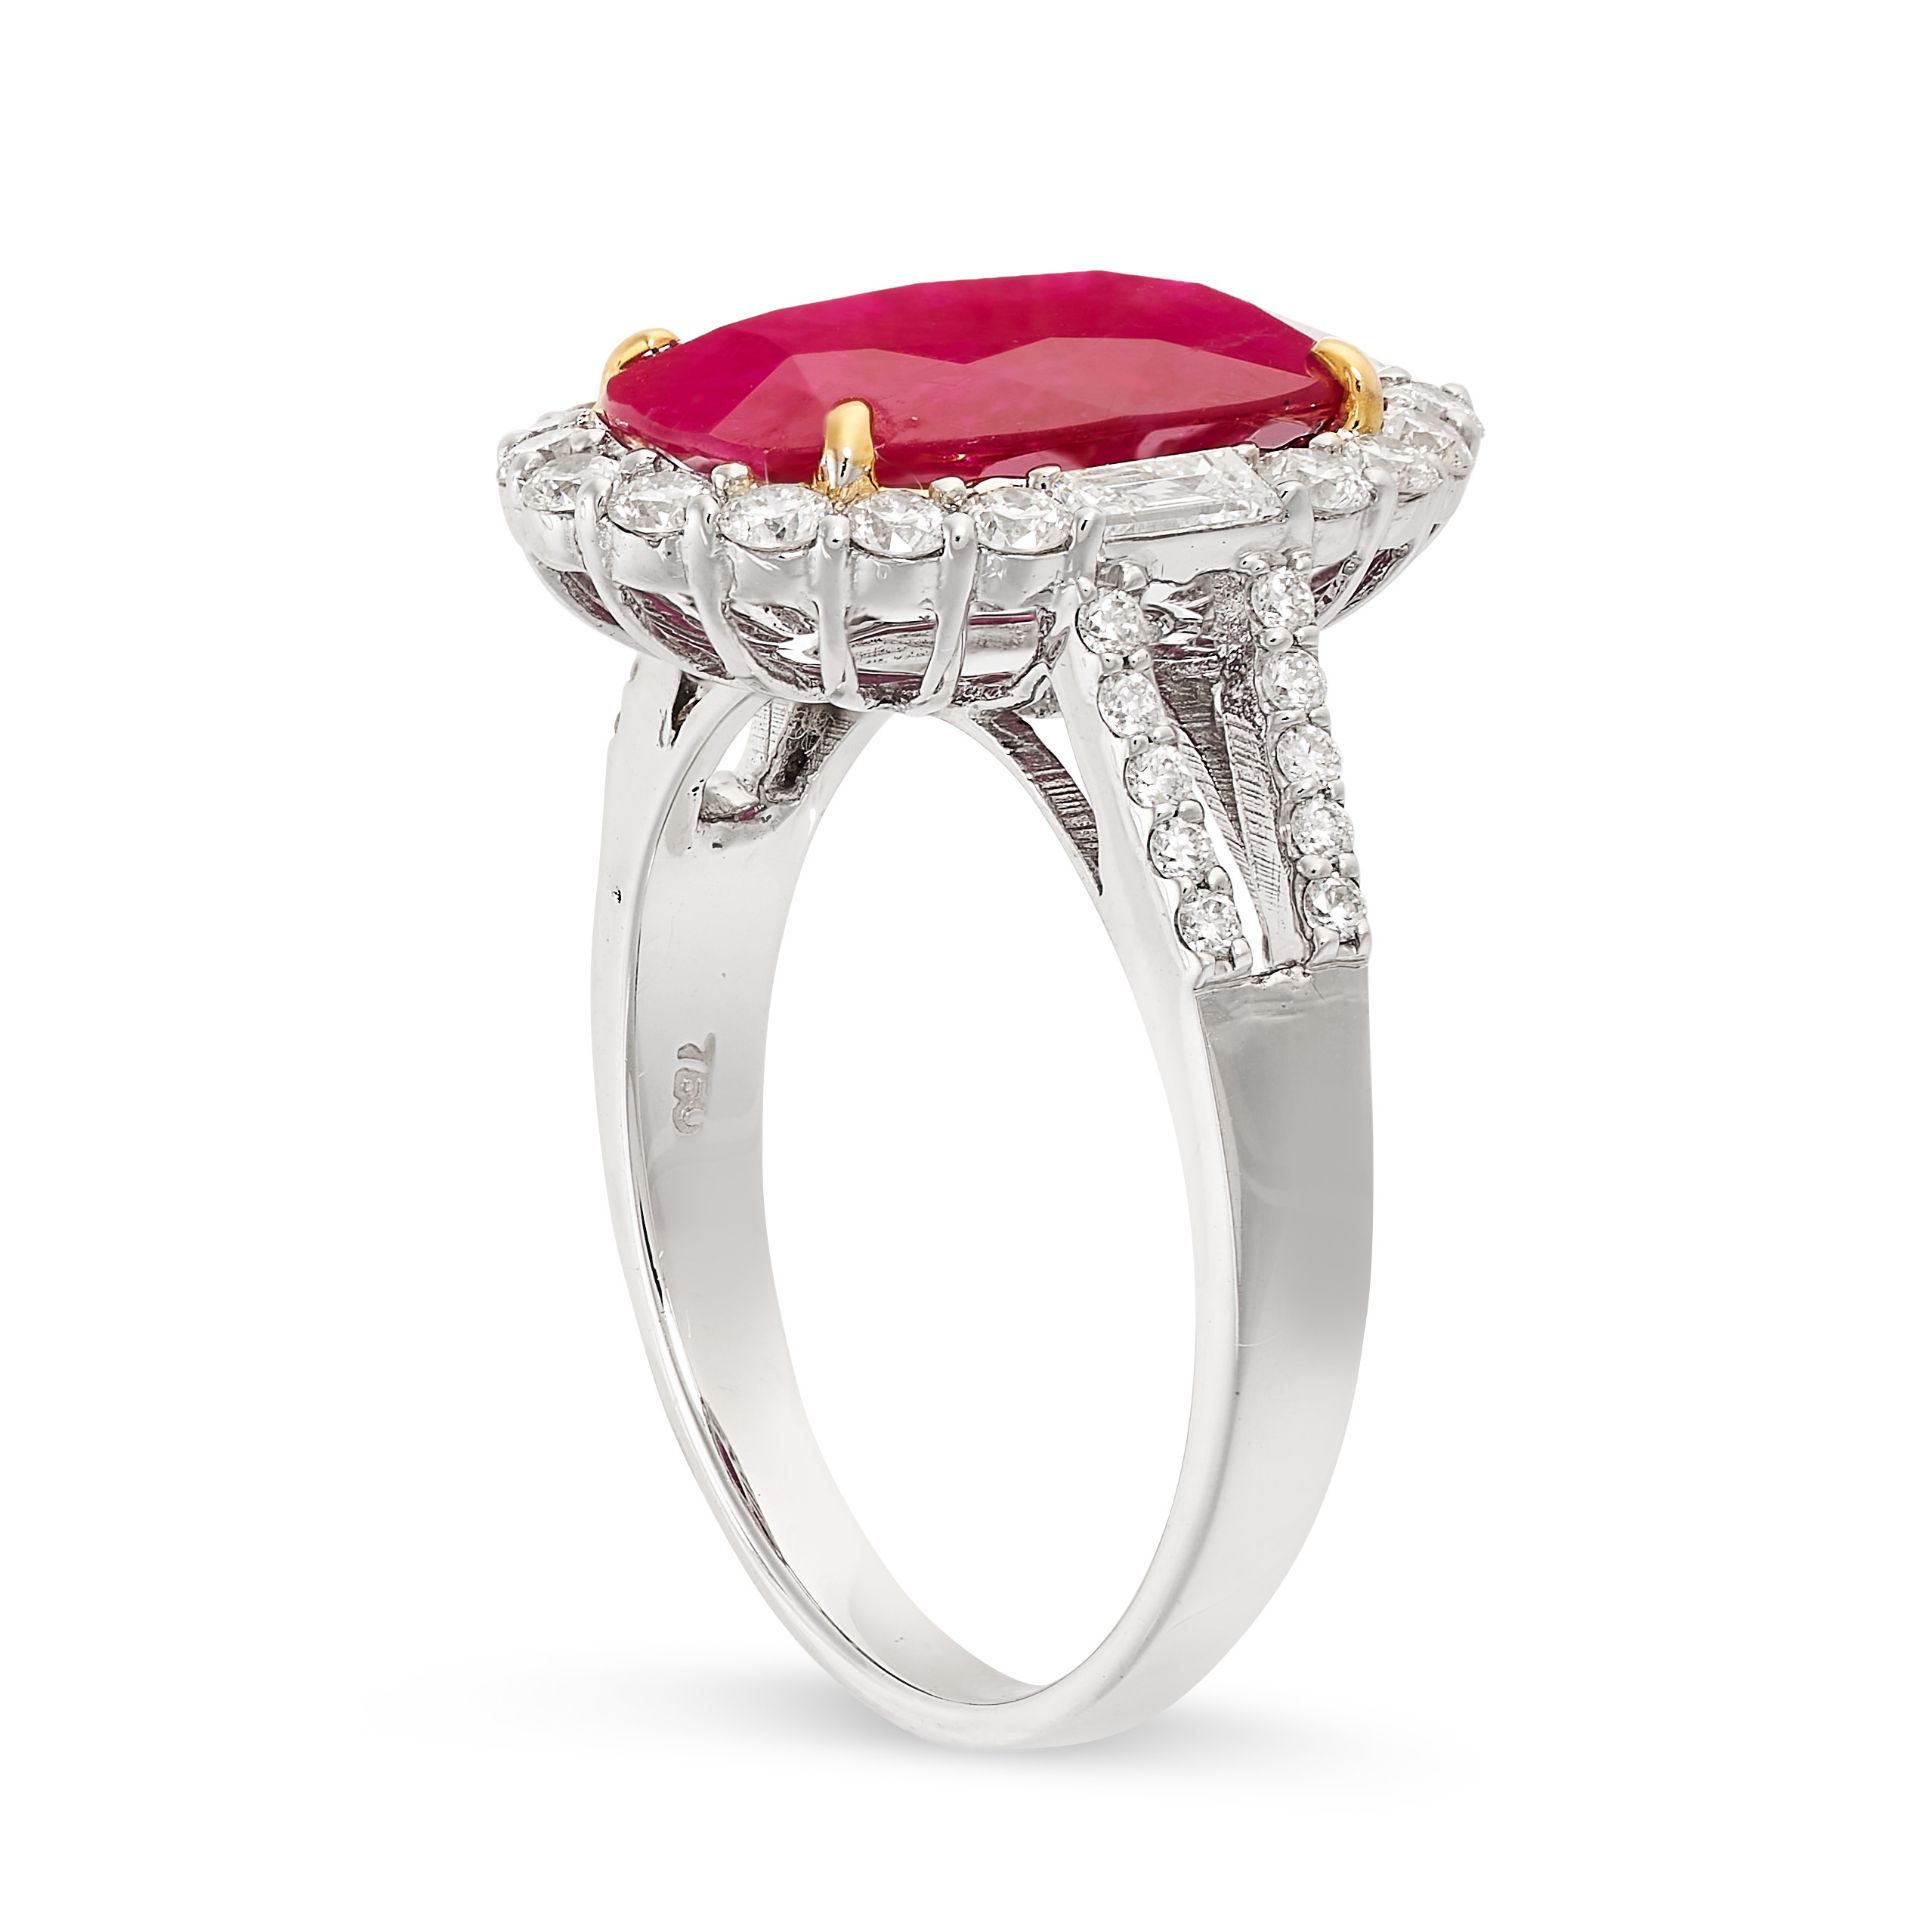 A RUBY AND DIAMOND RING in 18ct gold, set with an oval cut ruby of 3.78 carats within a cluster of - Bild 2 aus 2